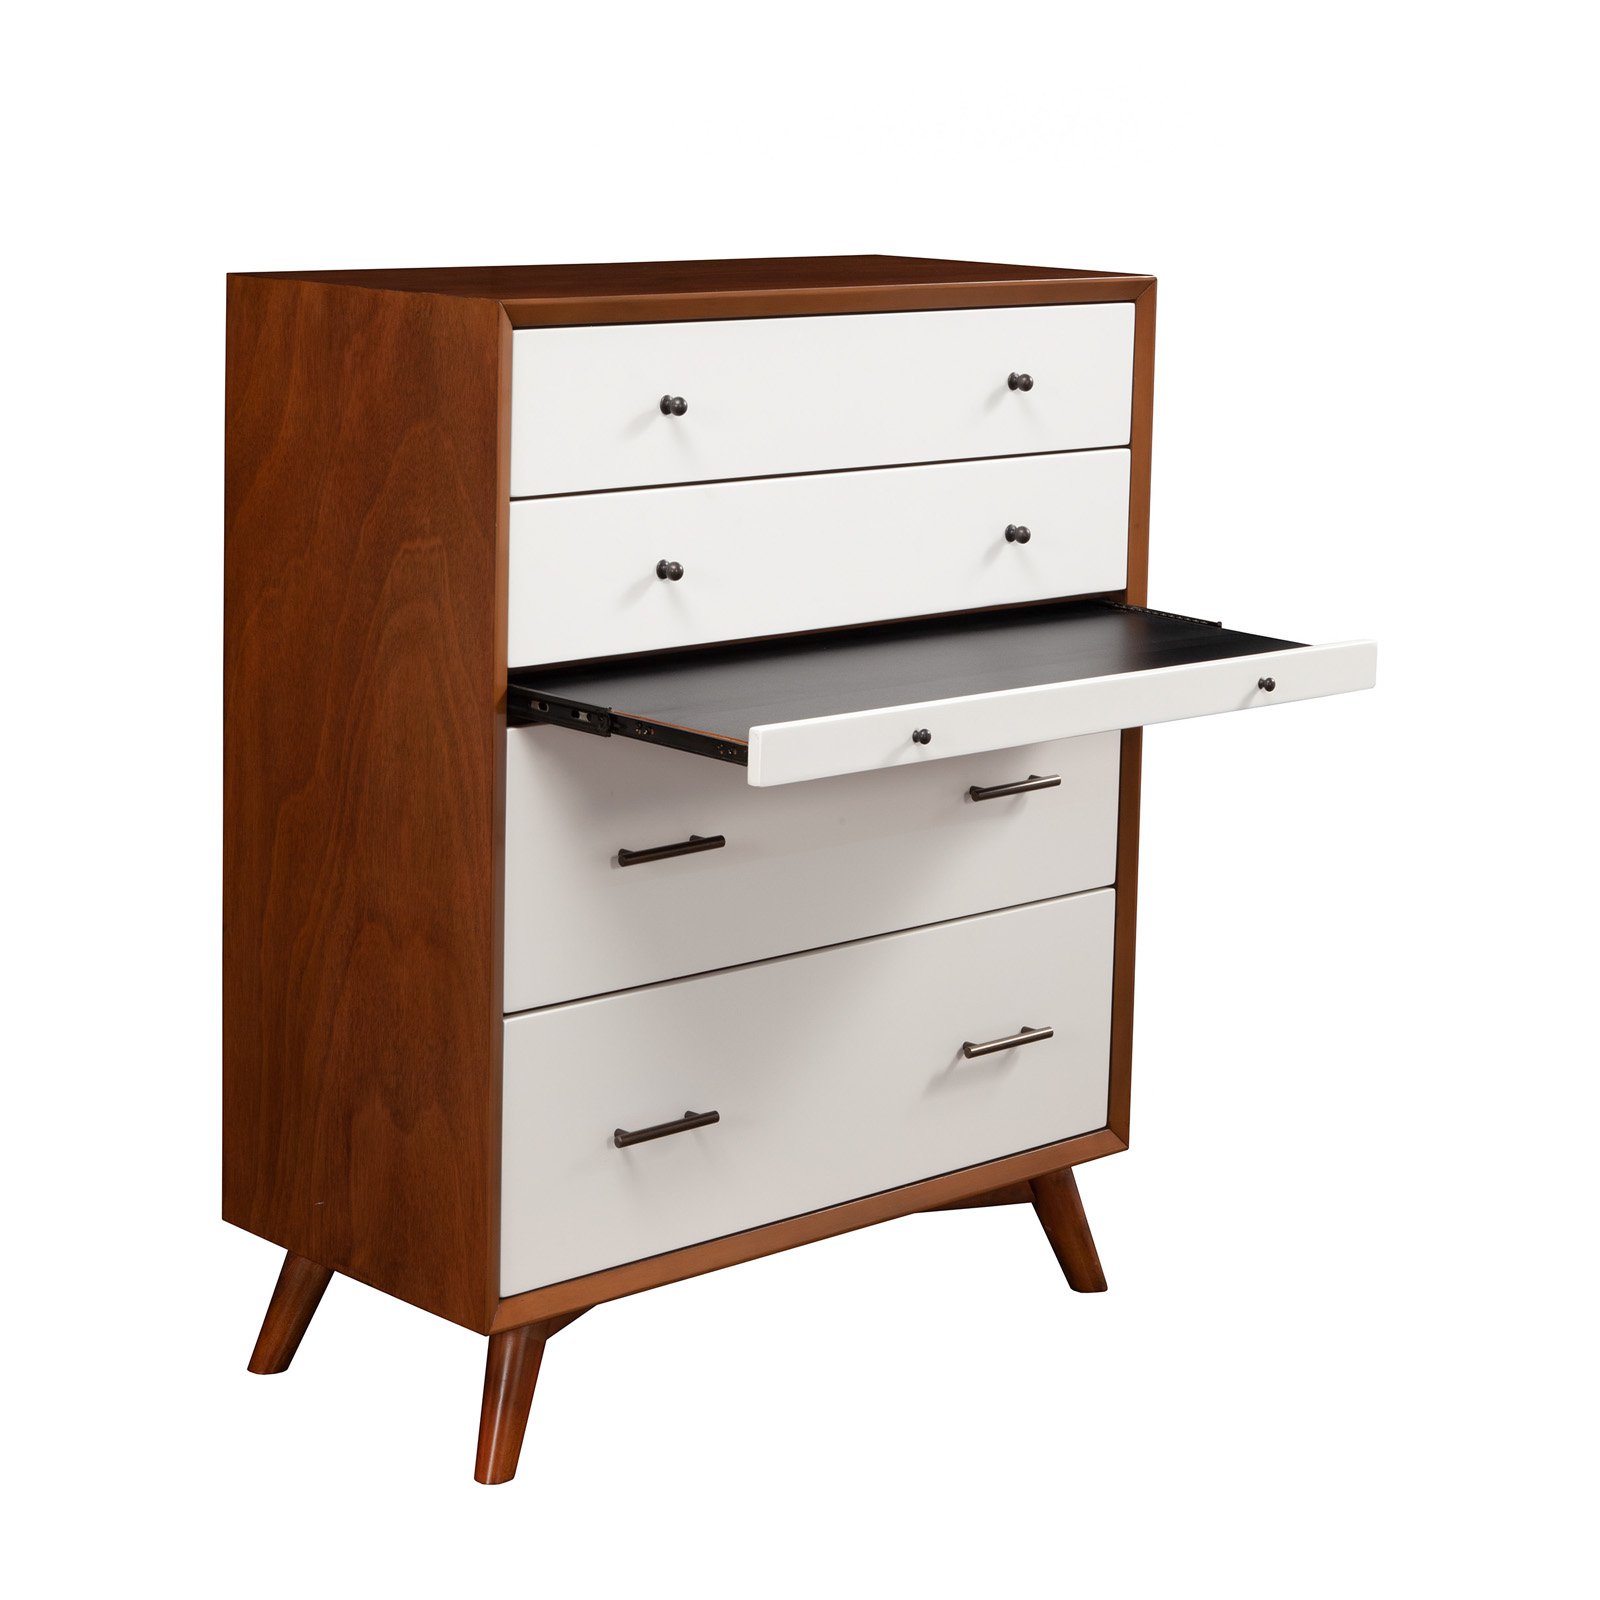 Alpine Furniture Flynn Mid Century Multi-function Wood Chest in Acorn-White - image 3 of 3